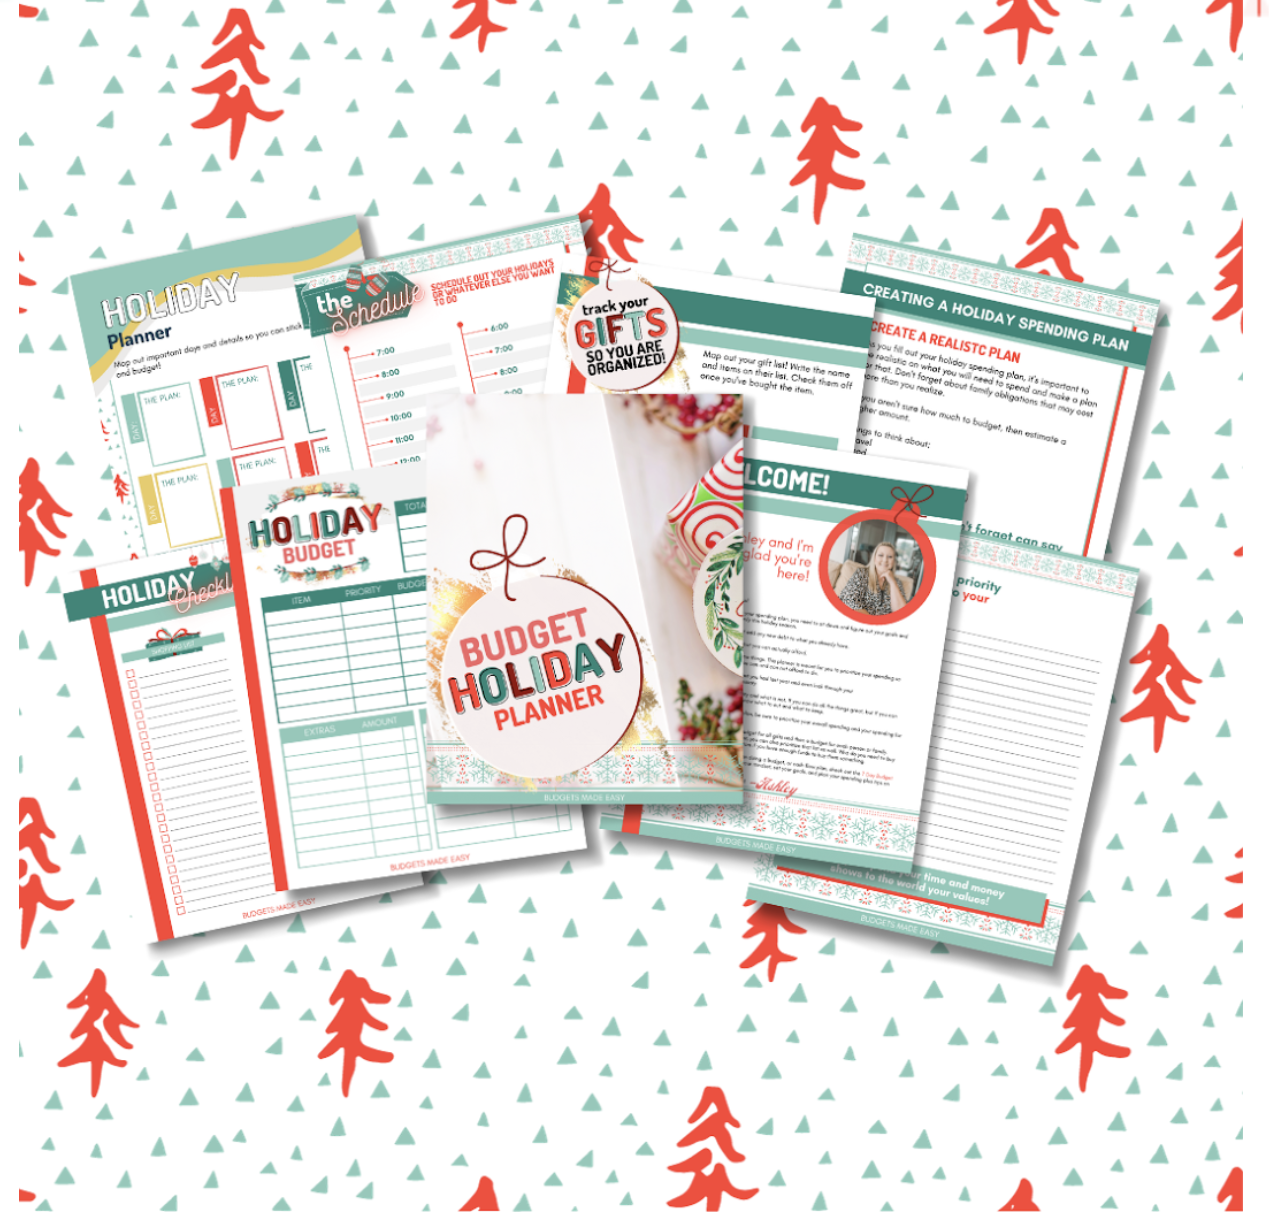 screenshot of Christmas budget planner printable worksheets from Budgets Made Easy